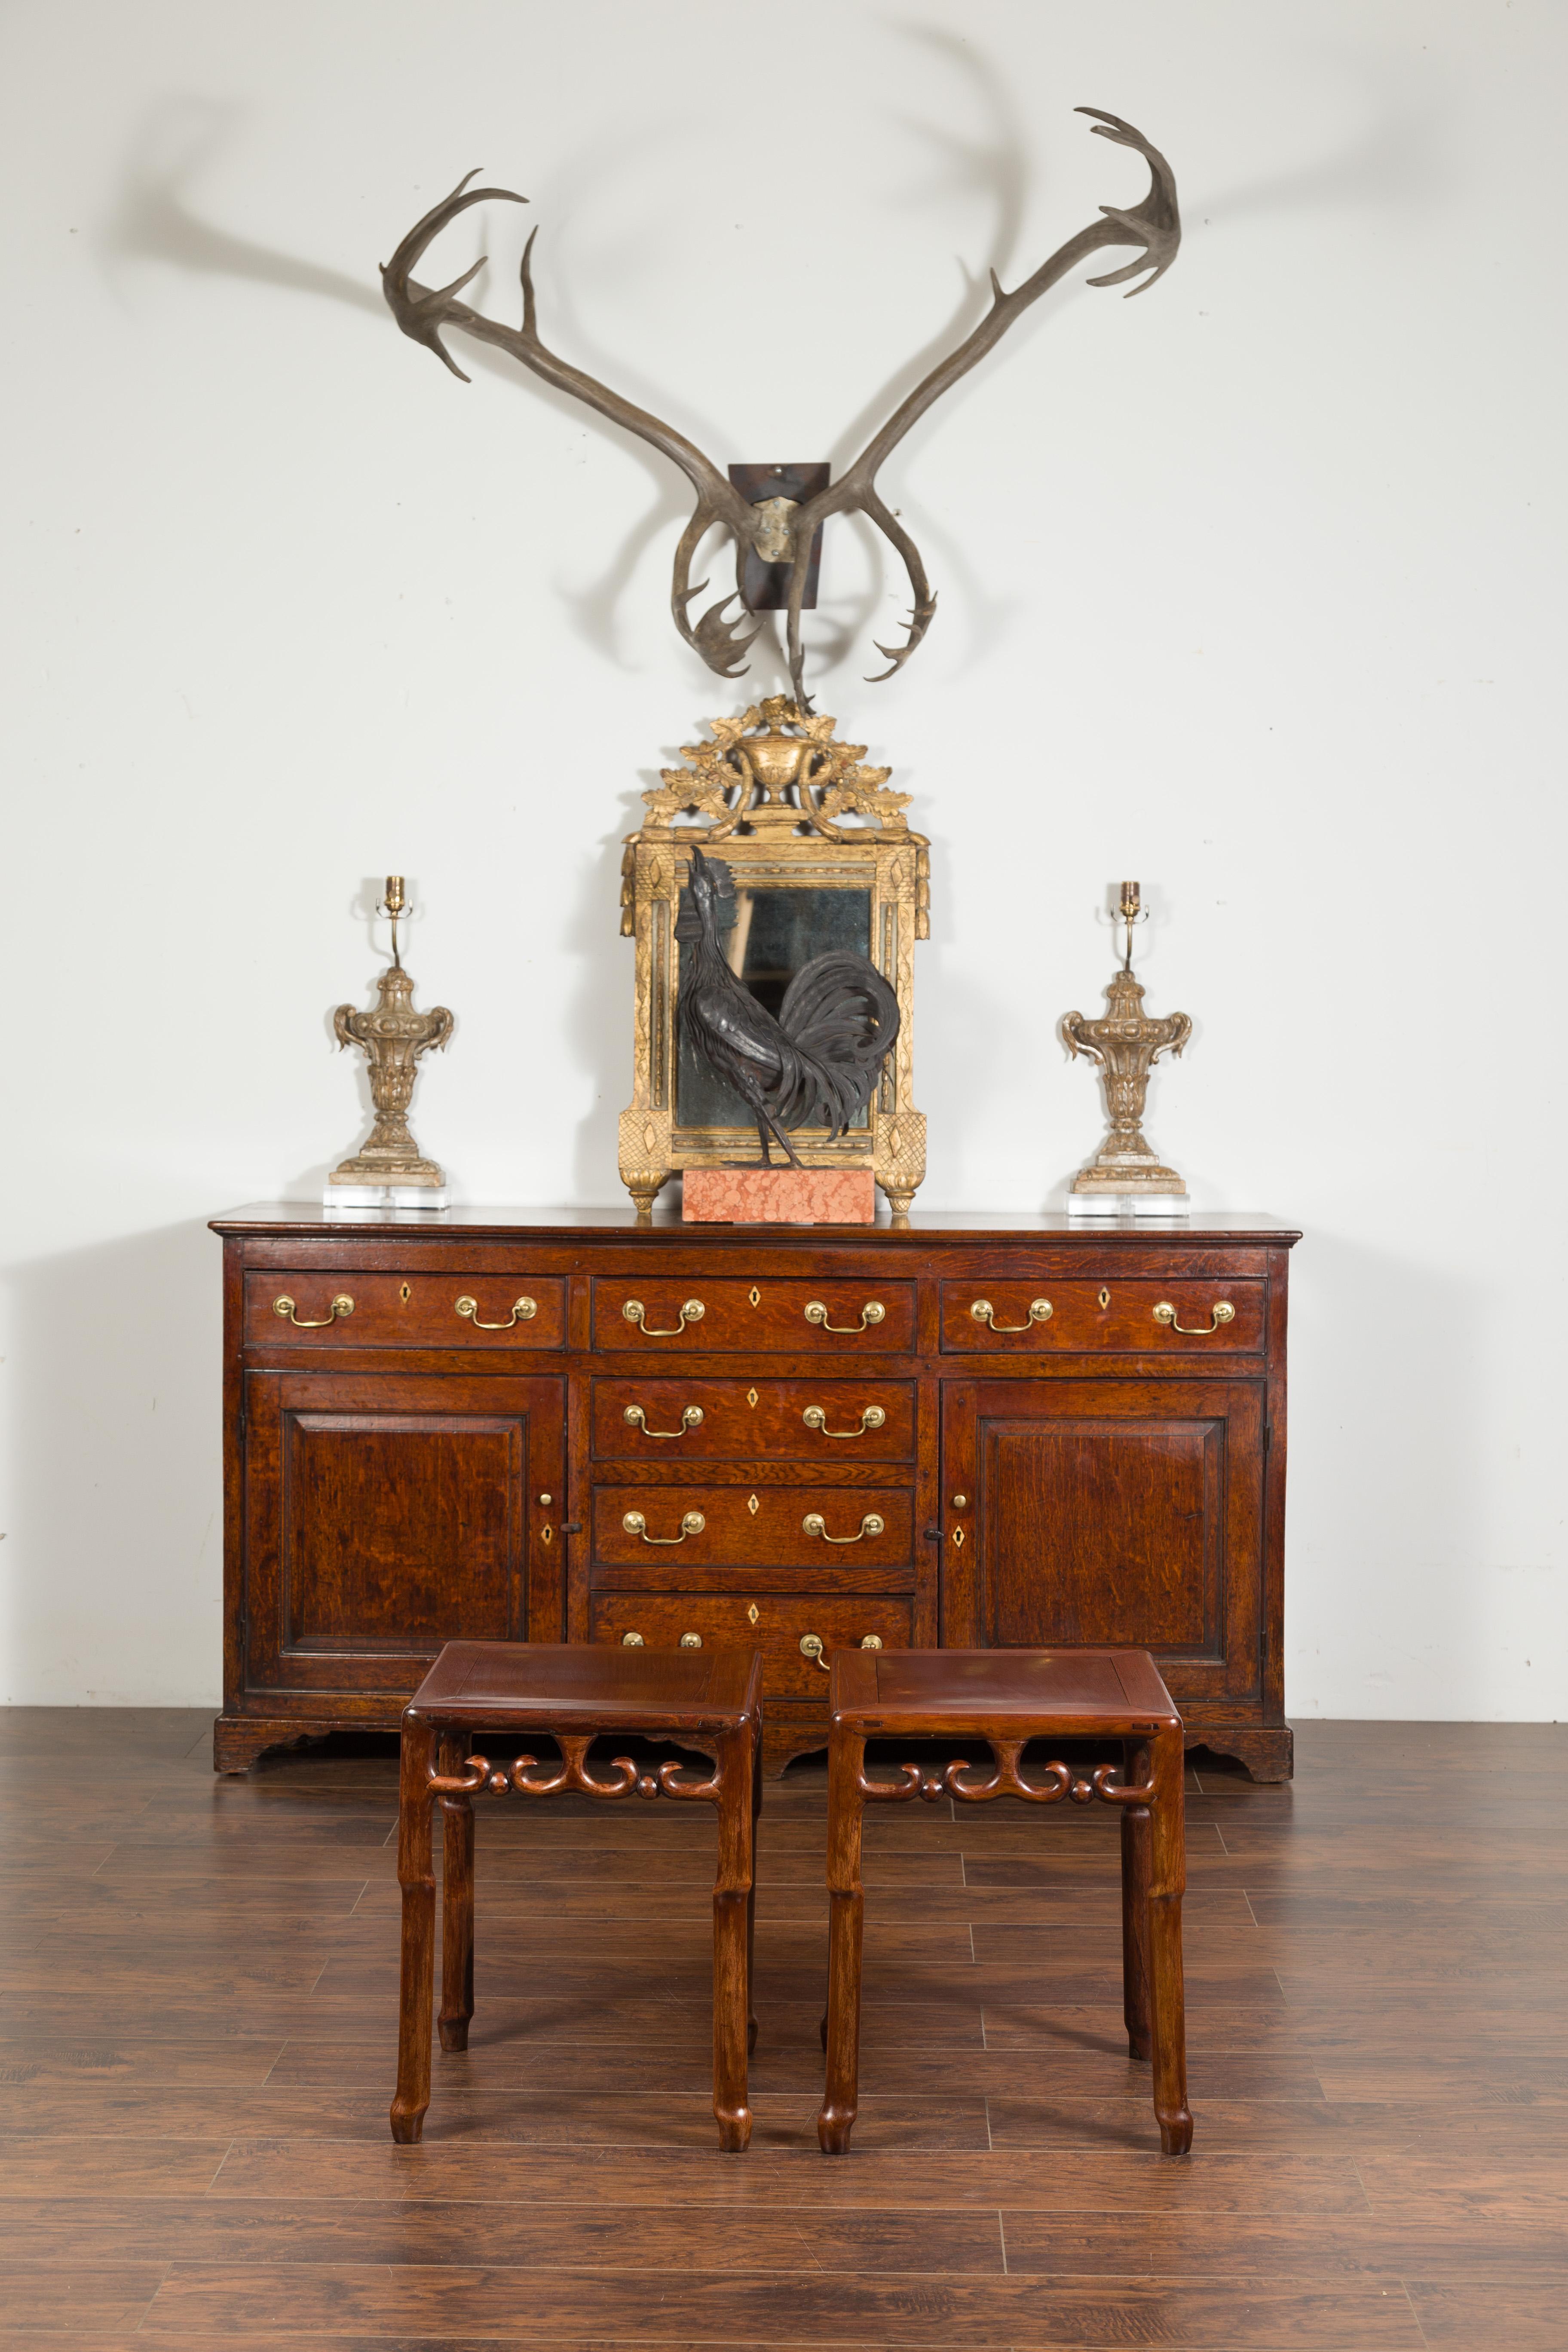 A pair of Asian mahogany side tables from the mid-20th century with scrolling fretwork motifs. Created during the midcentury period, each of this pair of side tables features a square top with central board, resting on an apron pierced with fretwork